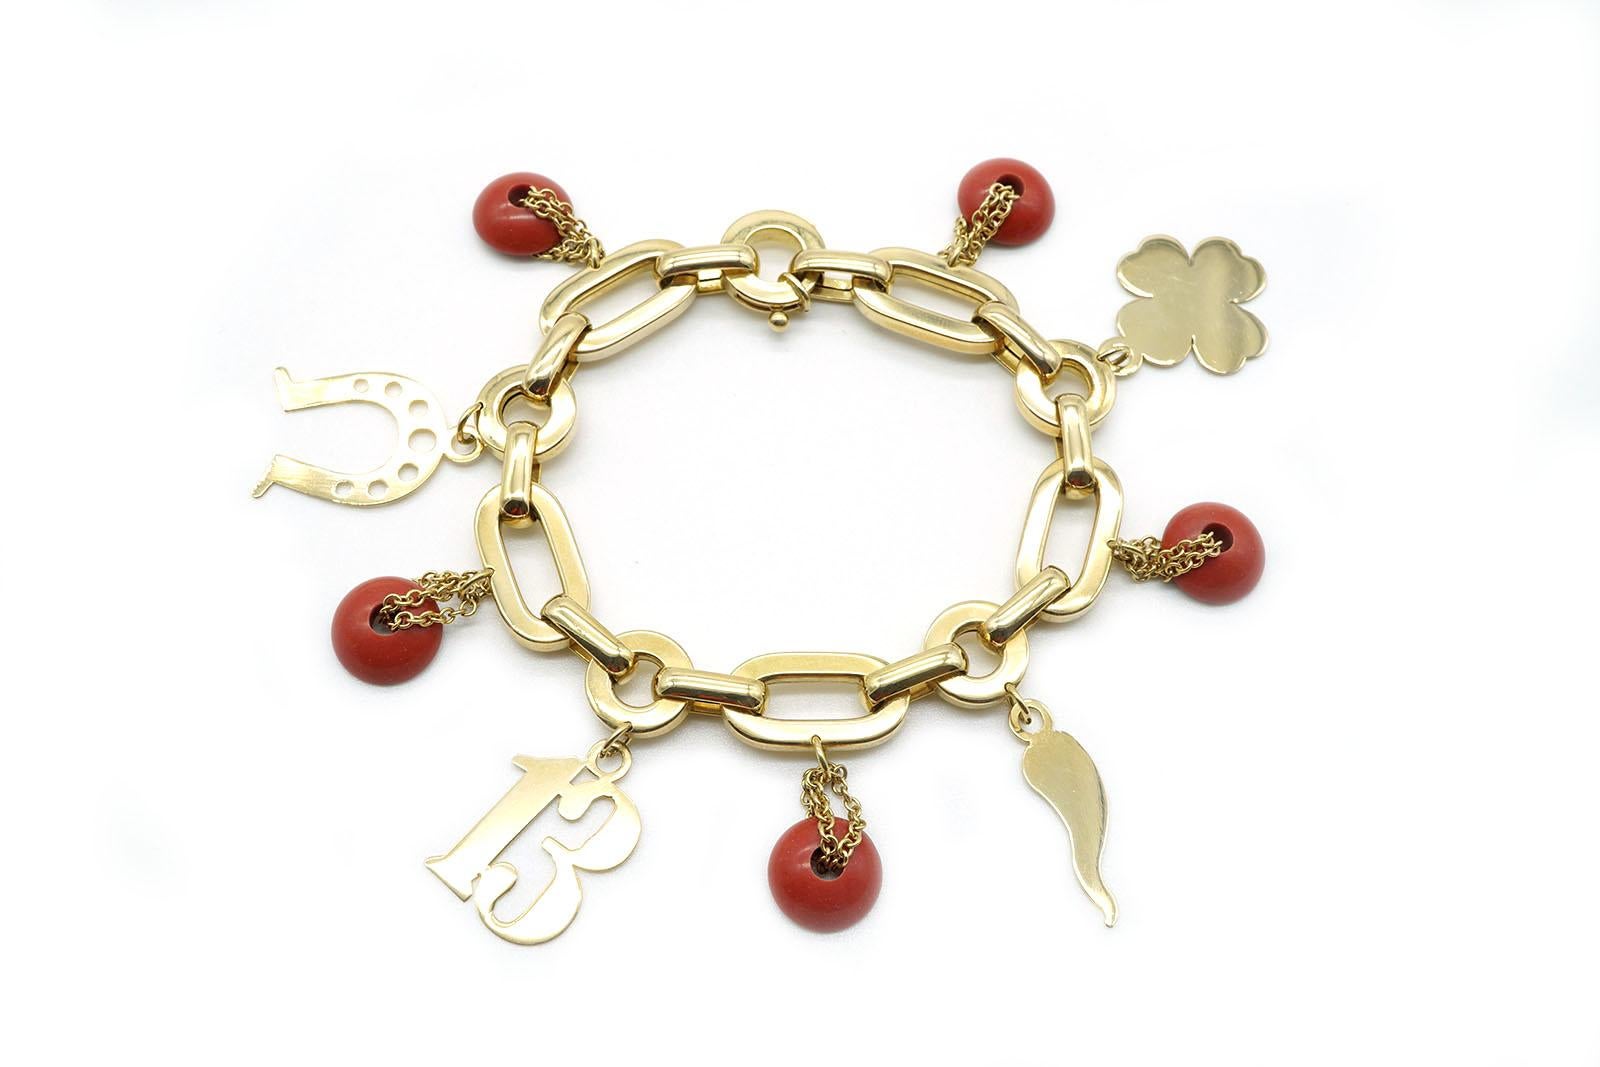 This cute and funny bracelet is made in 18 Kt yellow gold weighing in total gr. 30.00
Links are oval and round and the lobster clasp is very easy to handle.
This bracelet is embellished with four lucky charms and coral paste round charms.
Length is